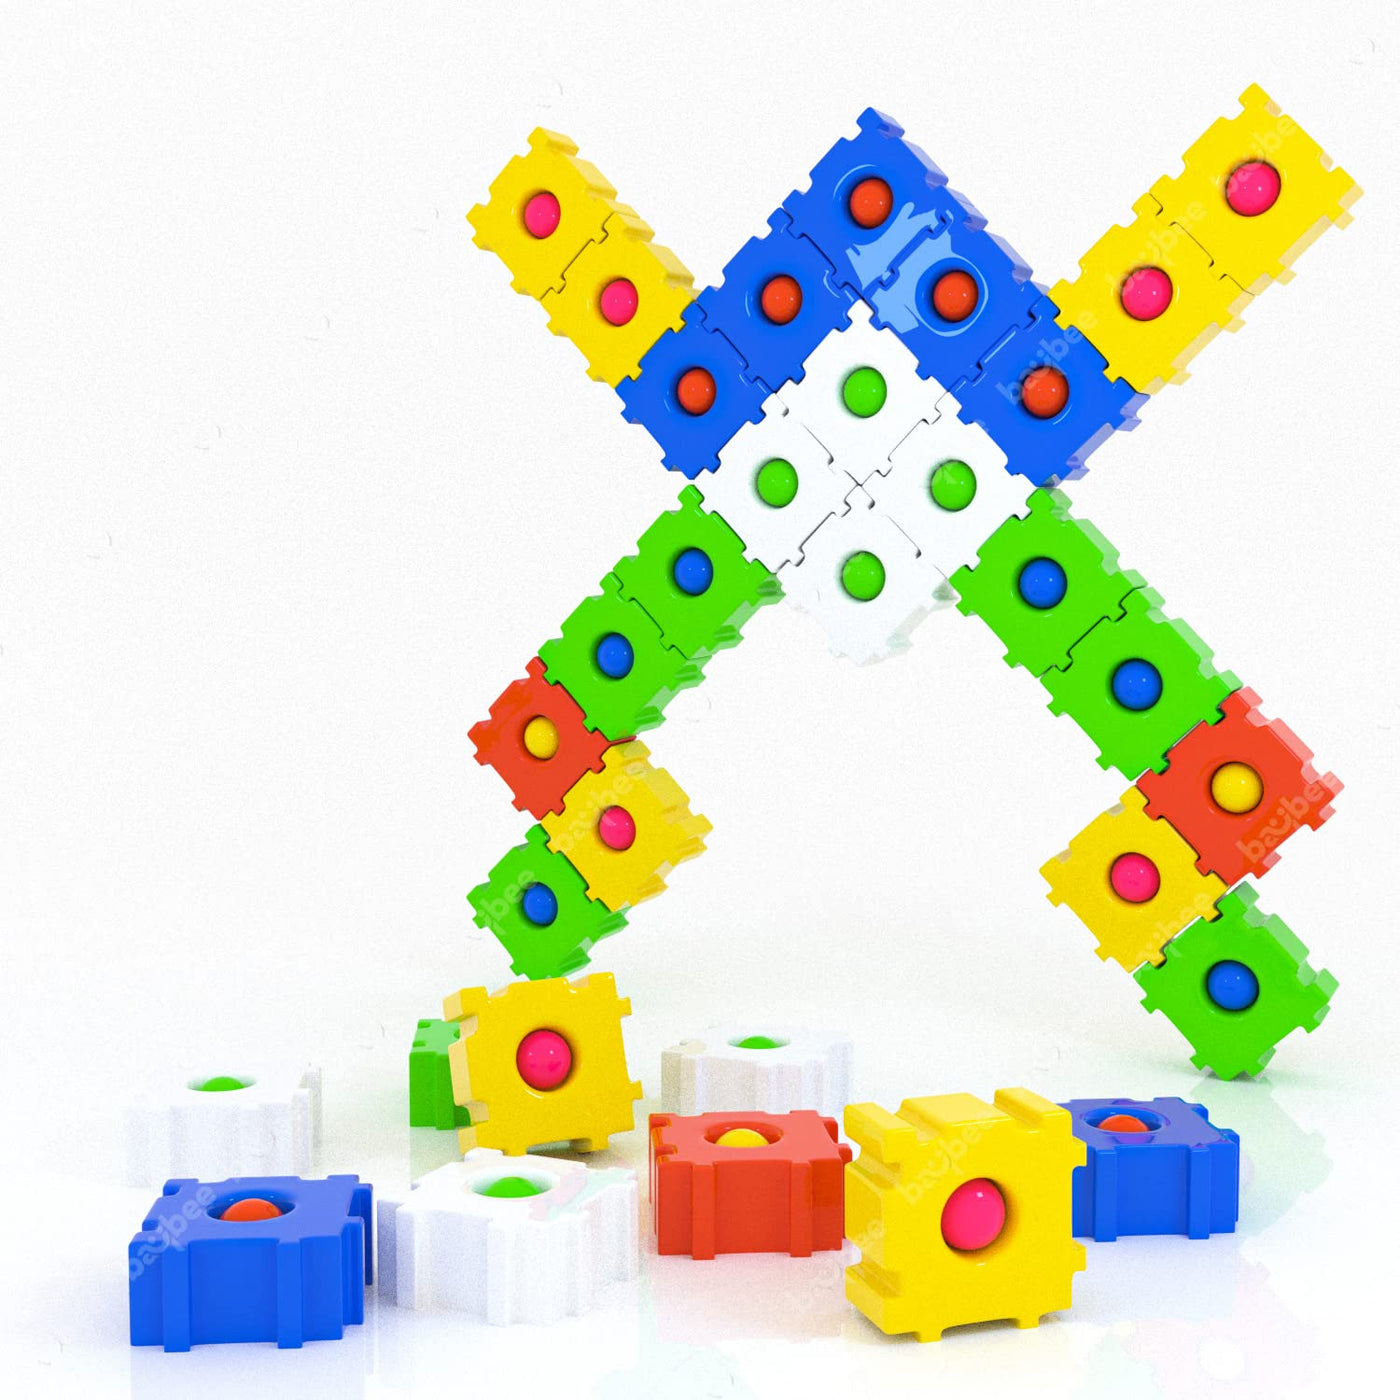 The best educational toys for kids